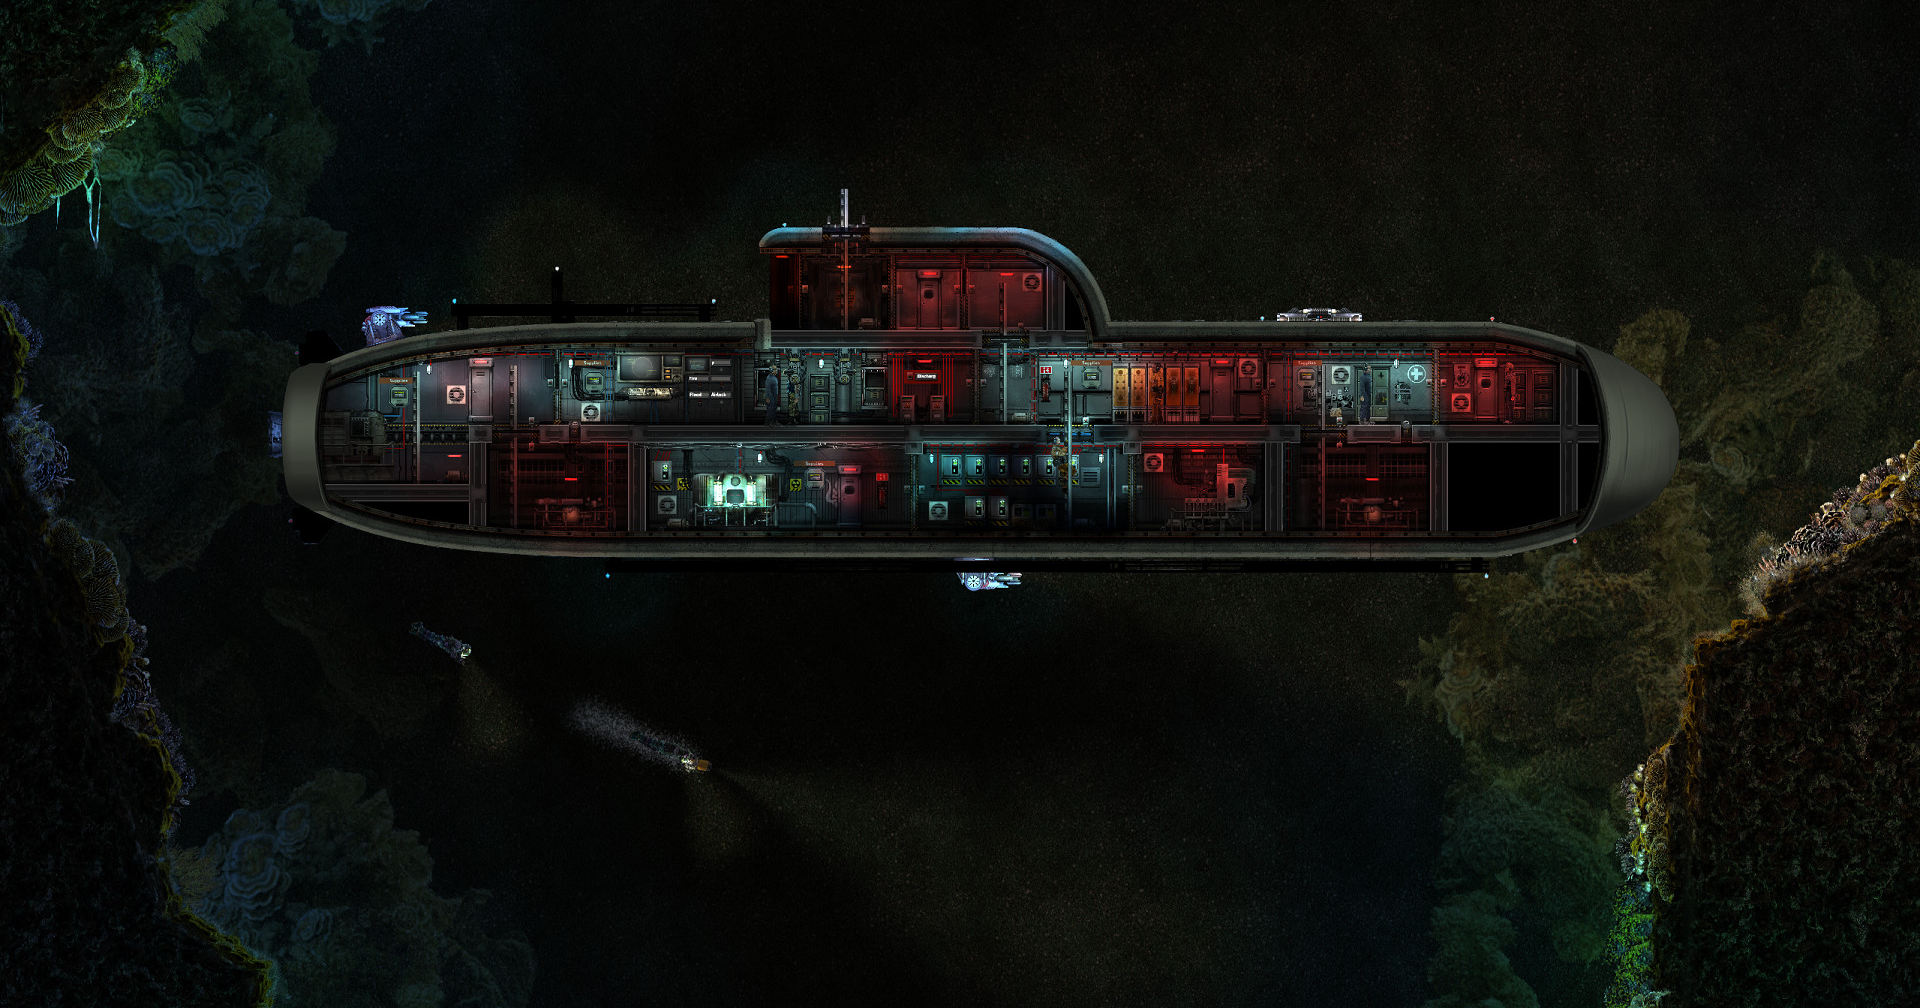 In Barotrauma, you'll control a submarine alone or in a team. Here we see a wide-angle shot of the boat from the side.